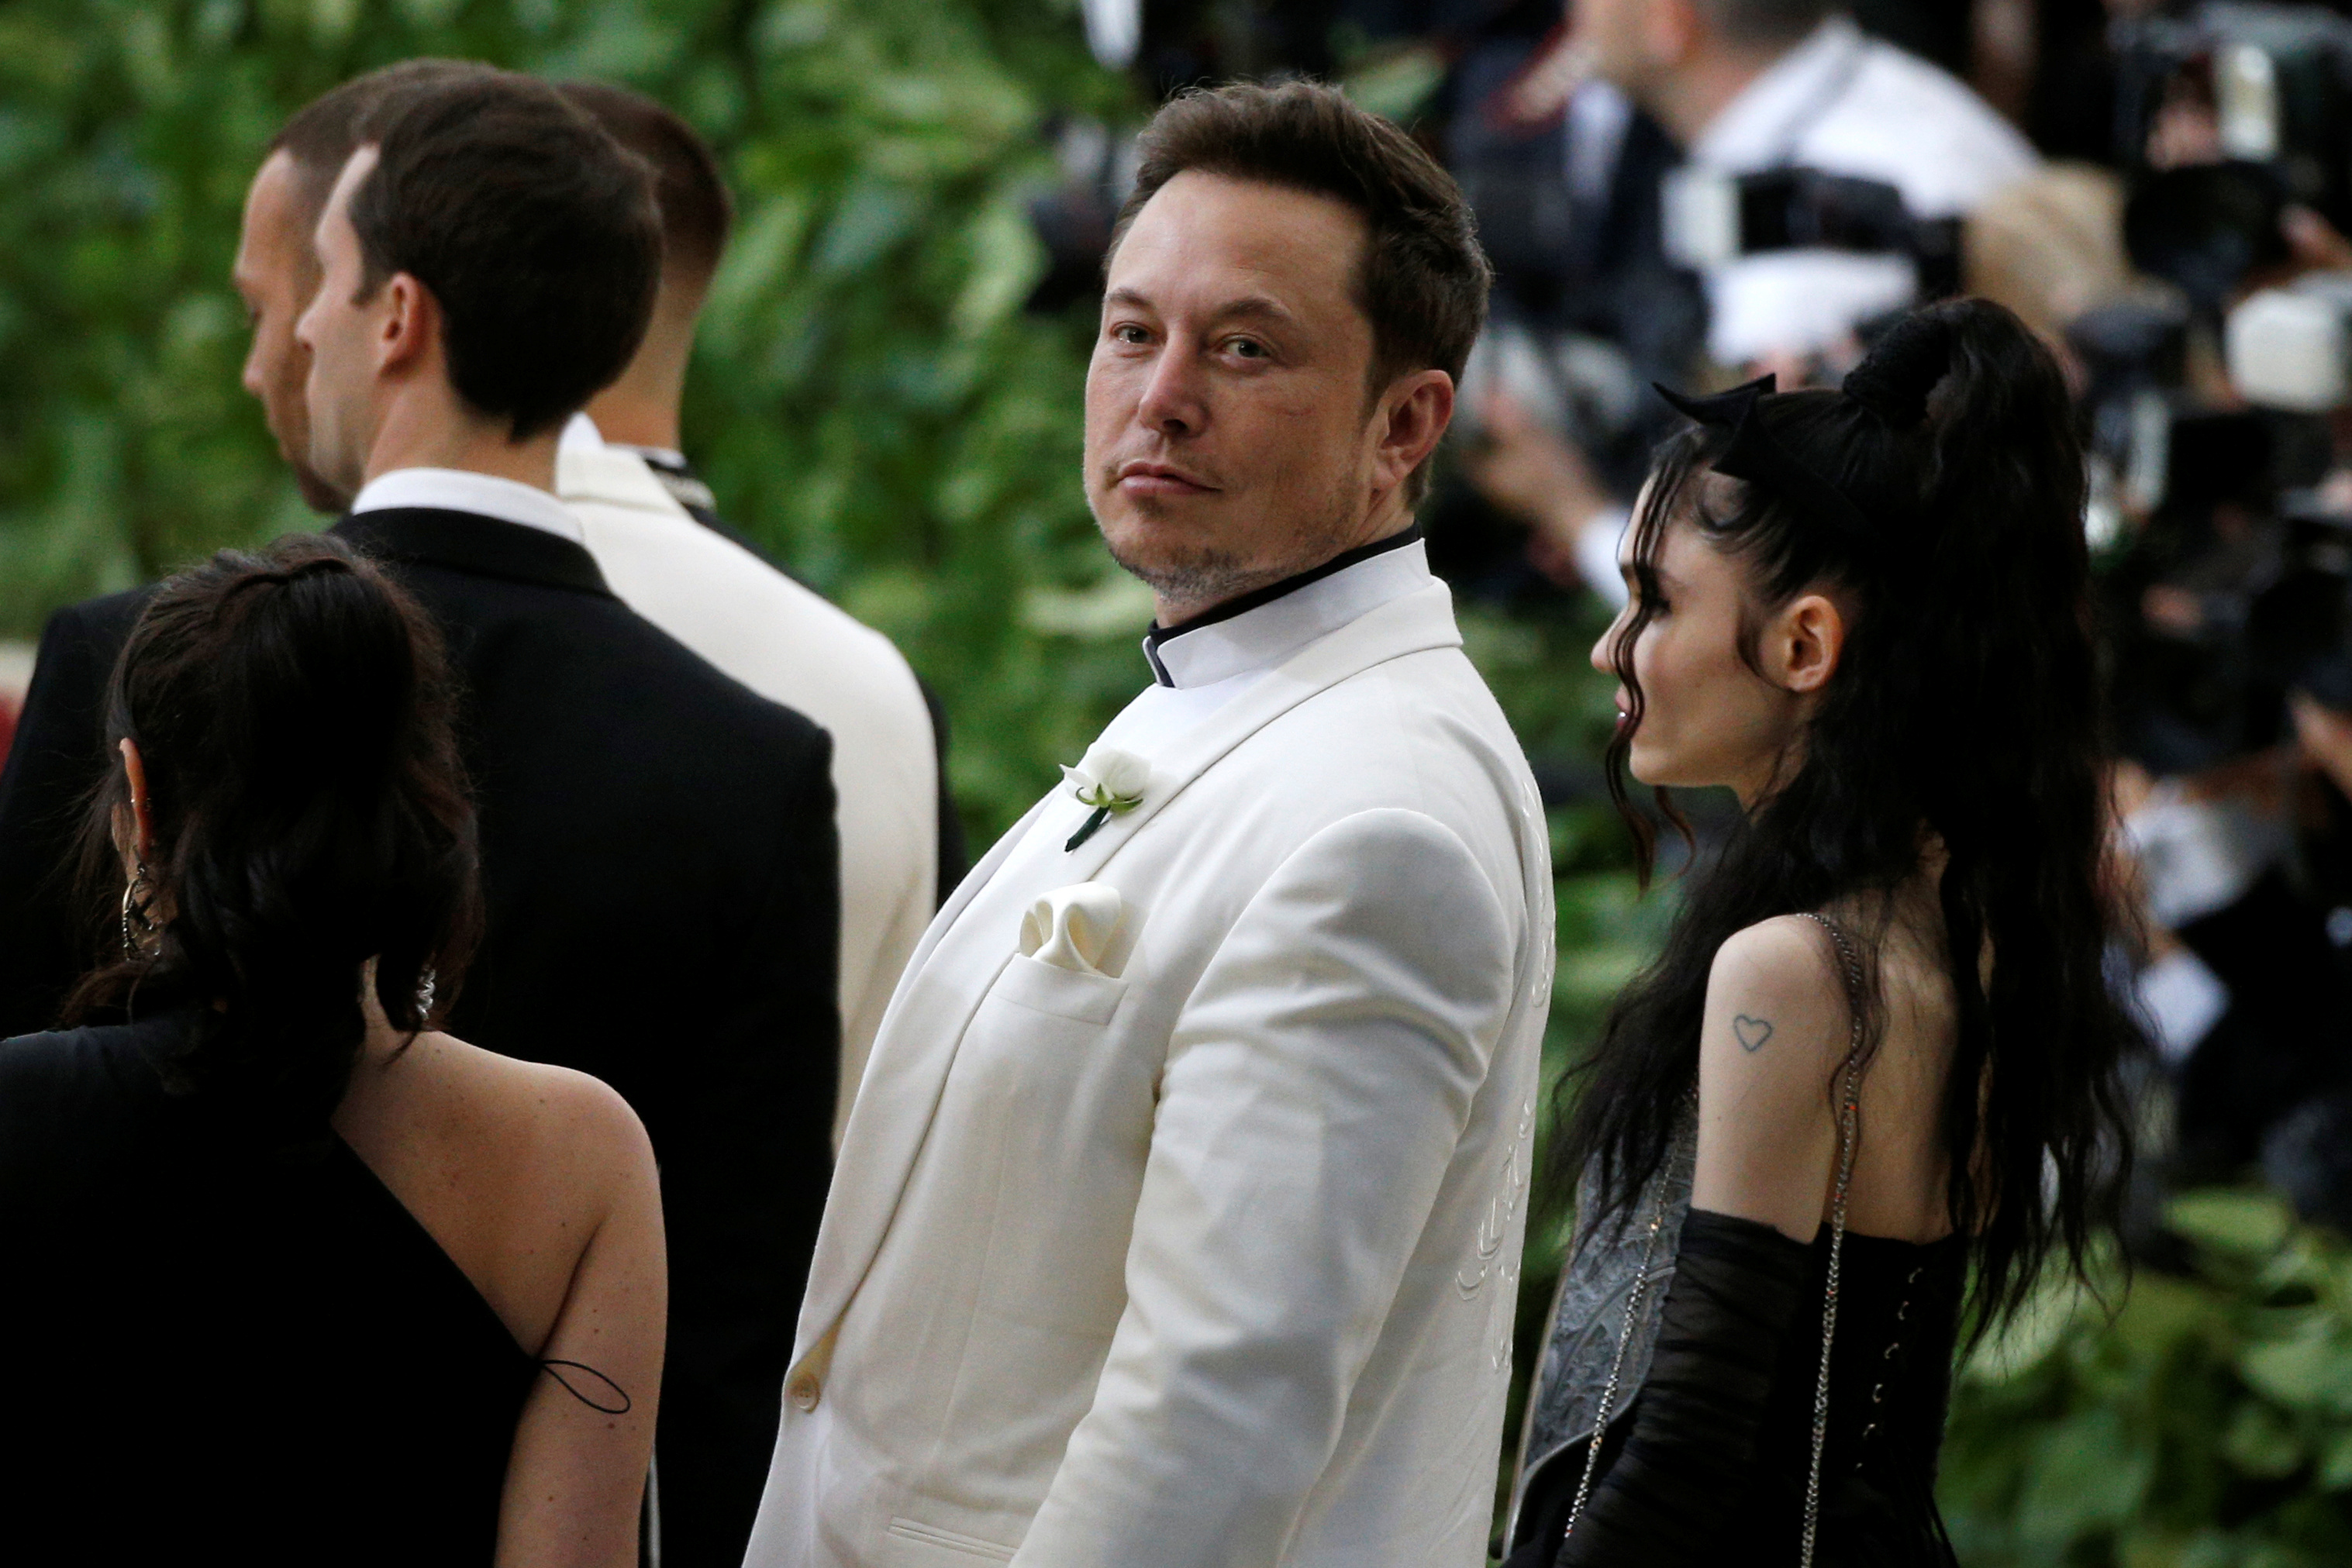 What Is Elon Musk's Net Worth and Where Does It Come From?